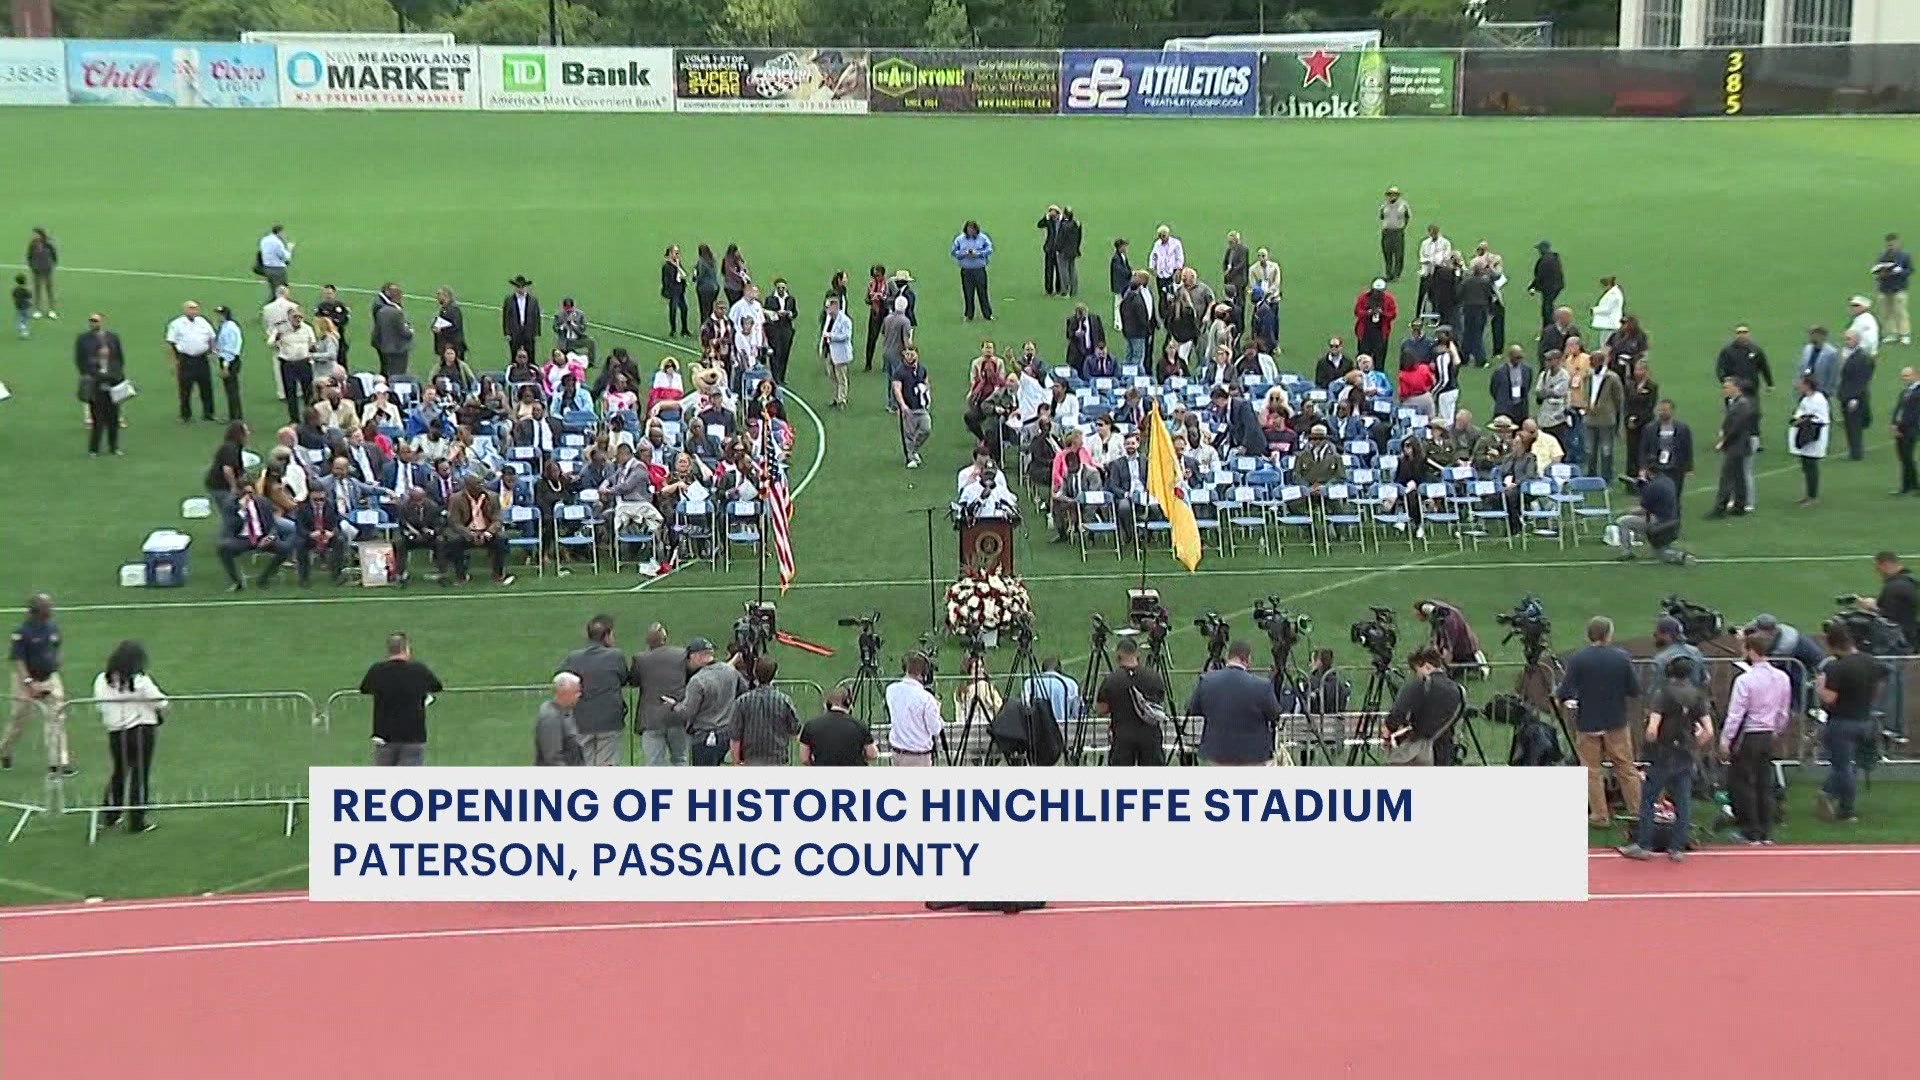 Hinchliffe Stadium, once home of Negro League games, reopens